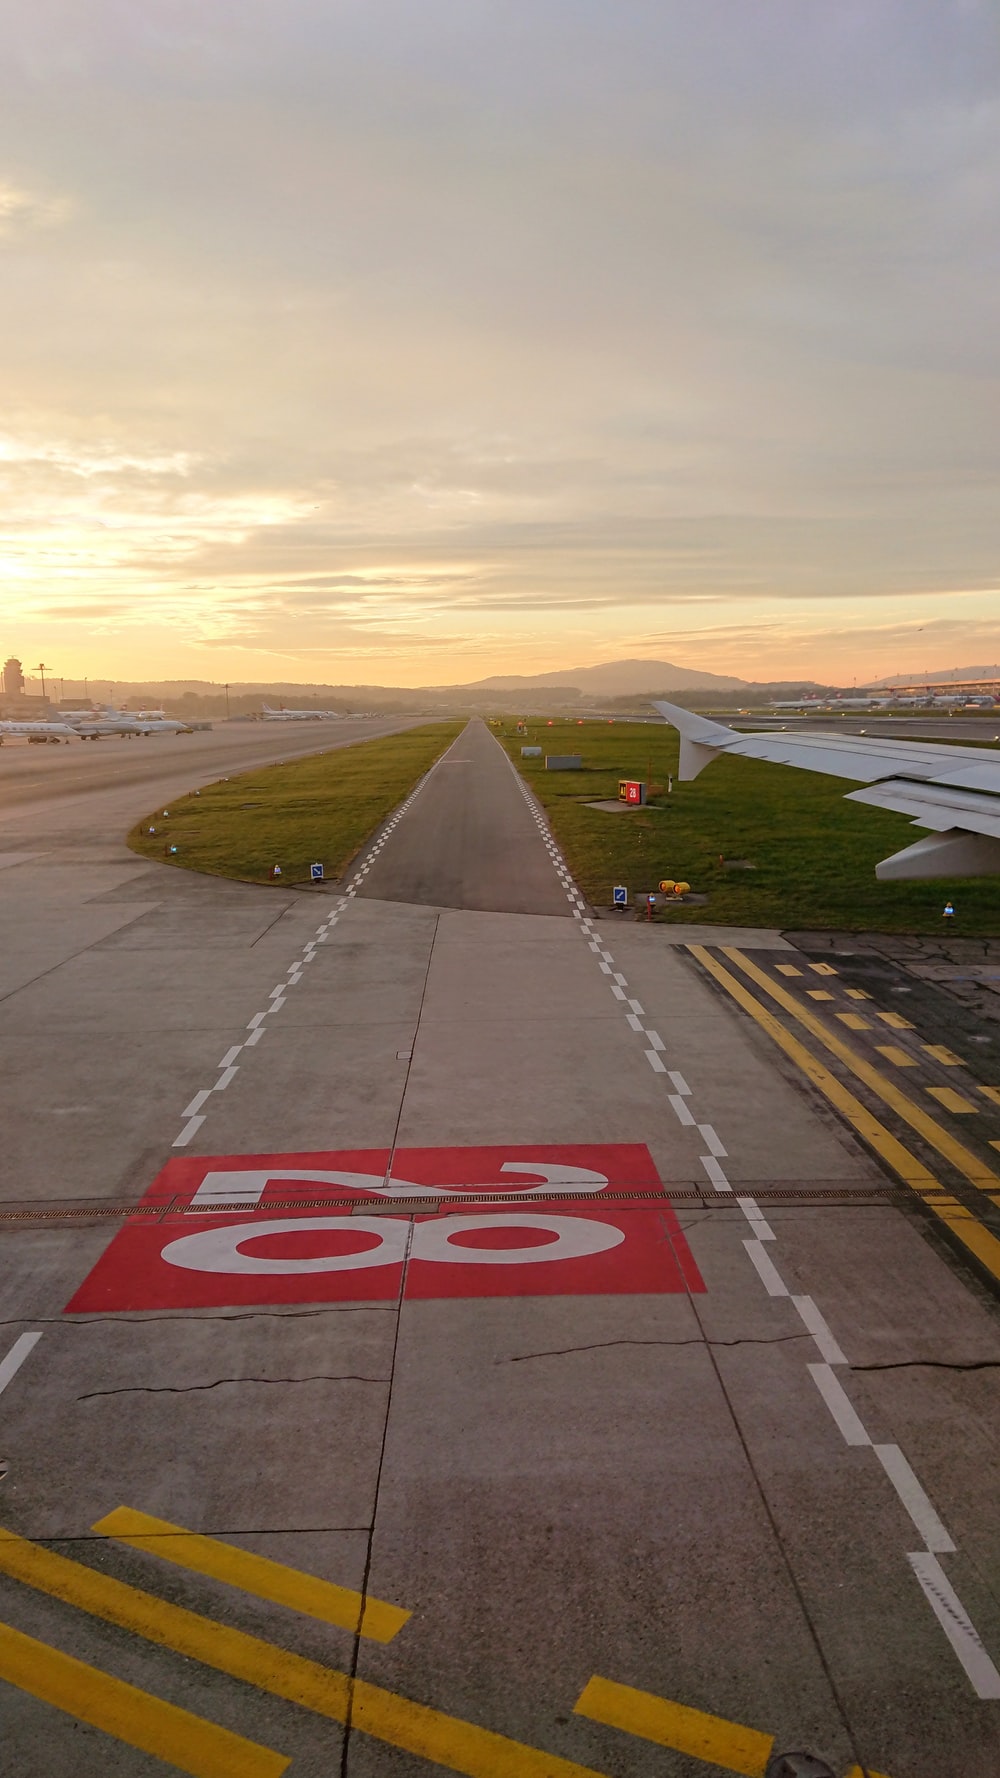 Used Concrete Asphalt Airport Empty Runway With Many Braking Marks Markings  For Landings And All Navigation Lights On Clear For Comercial Airplane  Landing Or Taking Off In Wroclaw Airport Stock Photo 